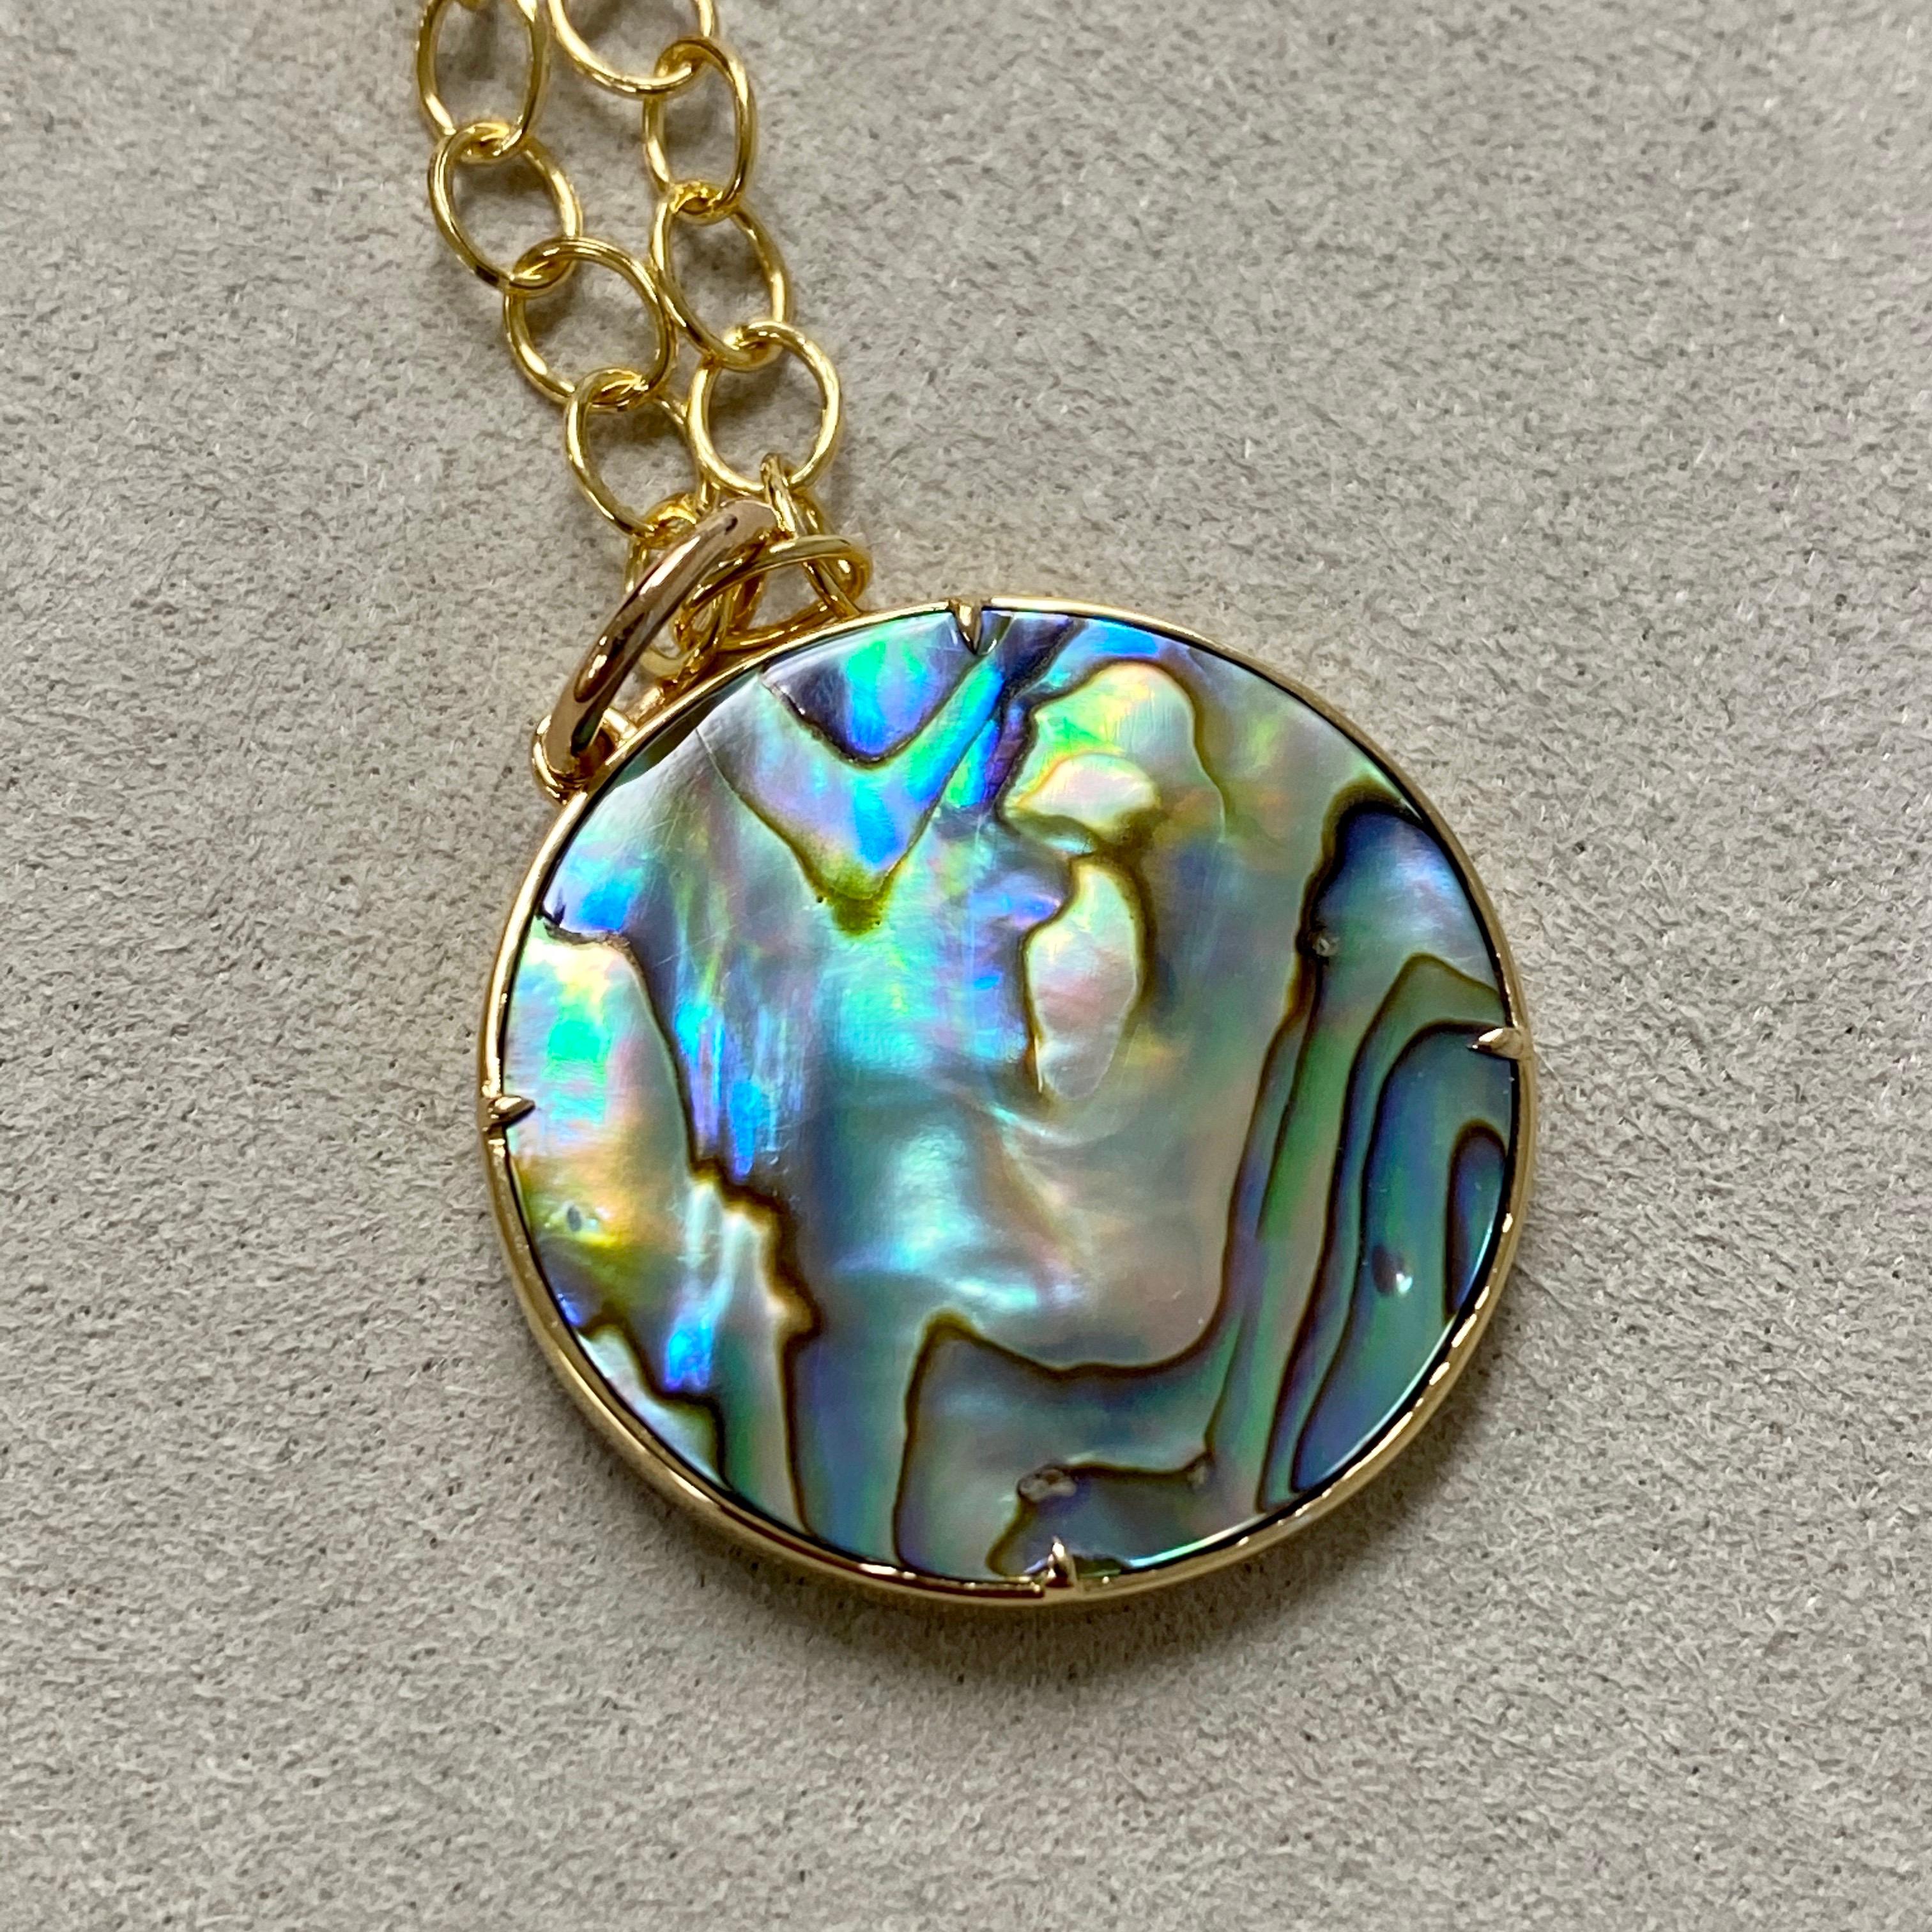 Round Cut Syna Yellow Gold Abalone Pendant with Black Enamel and Champagne Diamonds